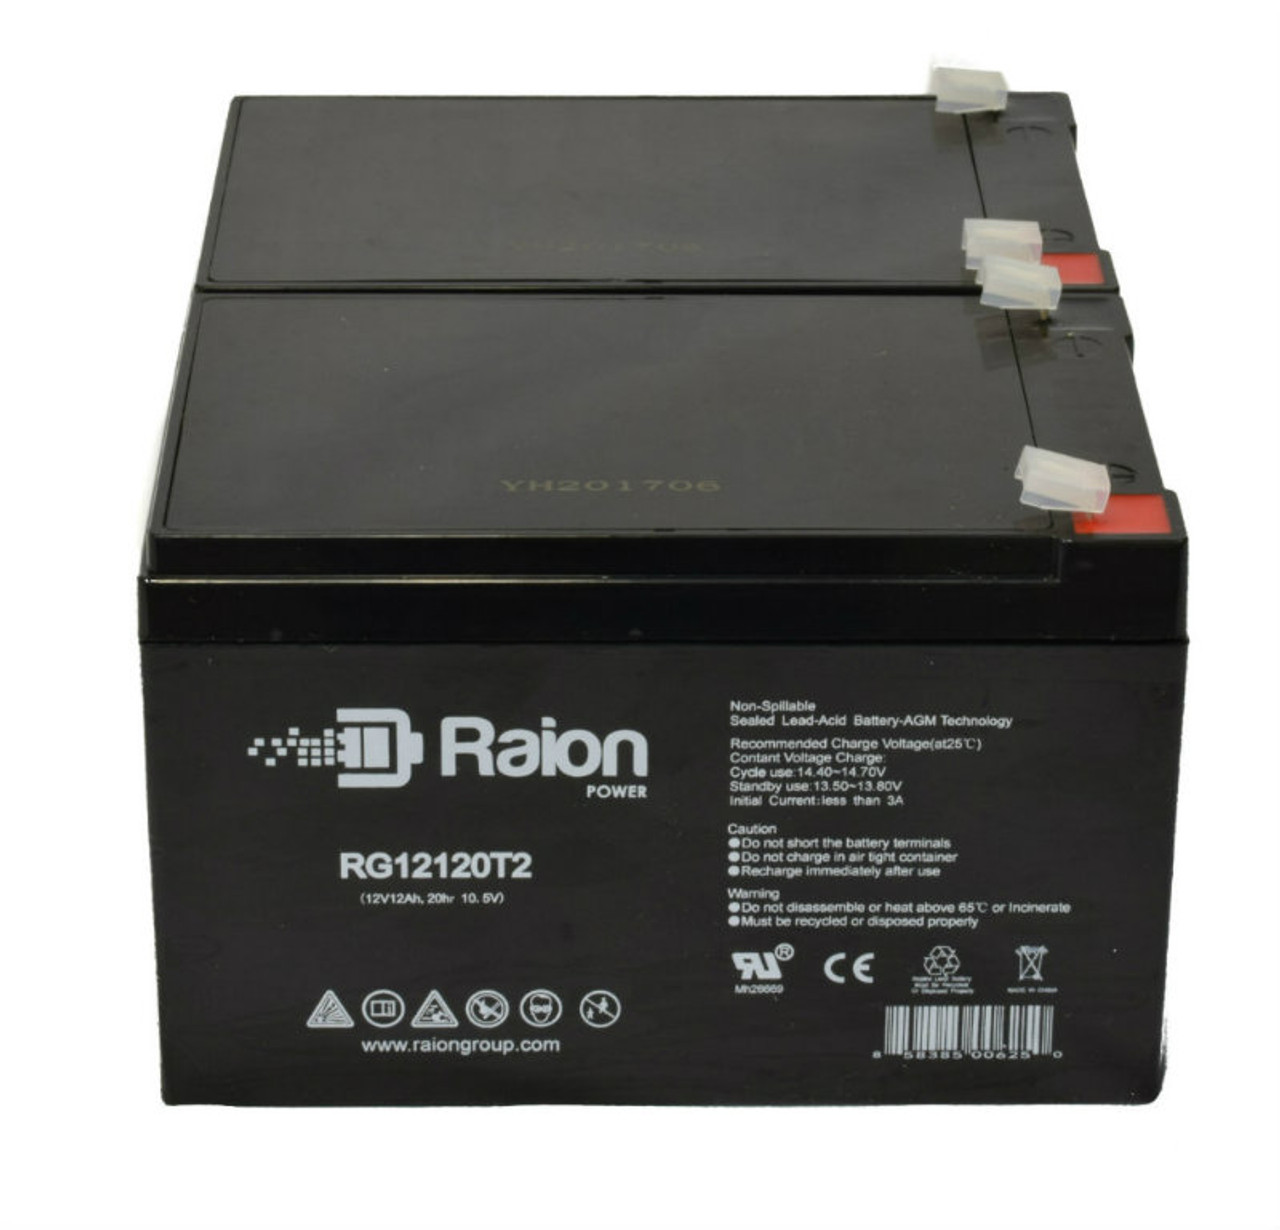 Raion Power 12V 12Ah Non-Spillable Compatible Replacement Battery for POWERGOR SB12-12 - (2 Pack)